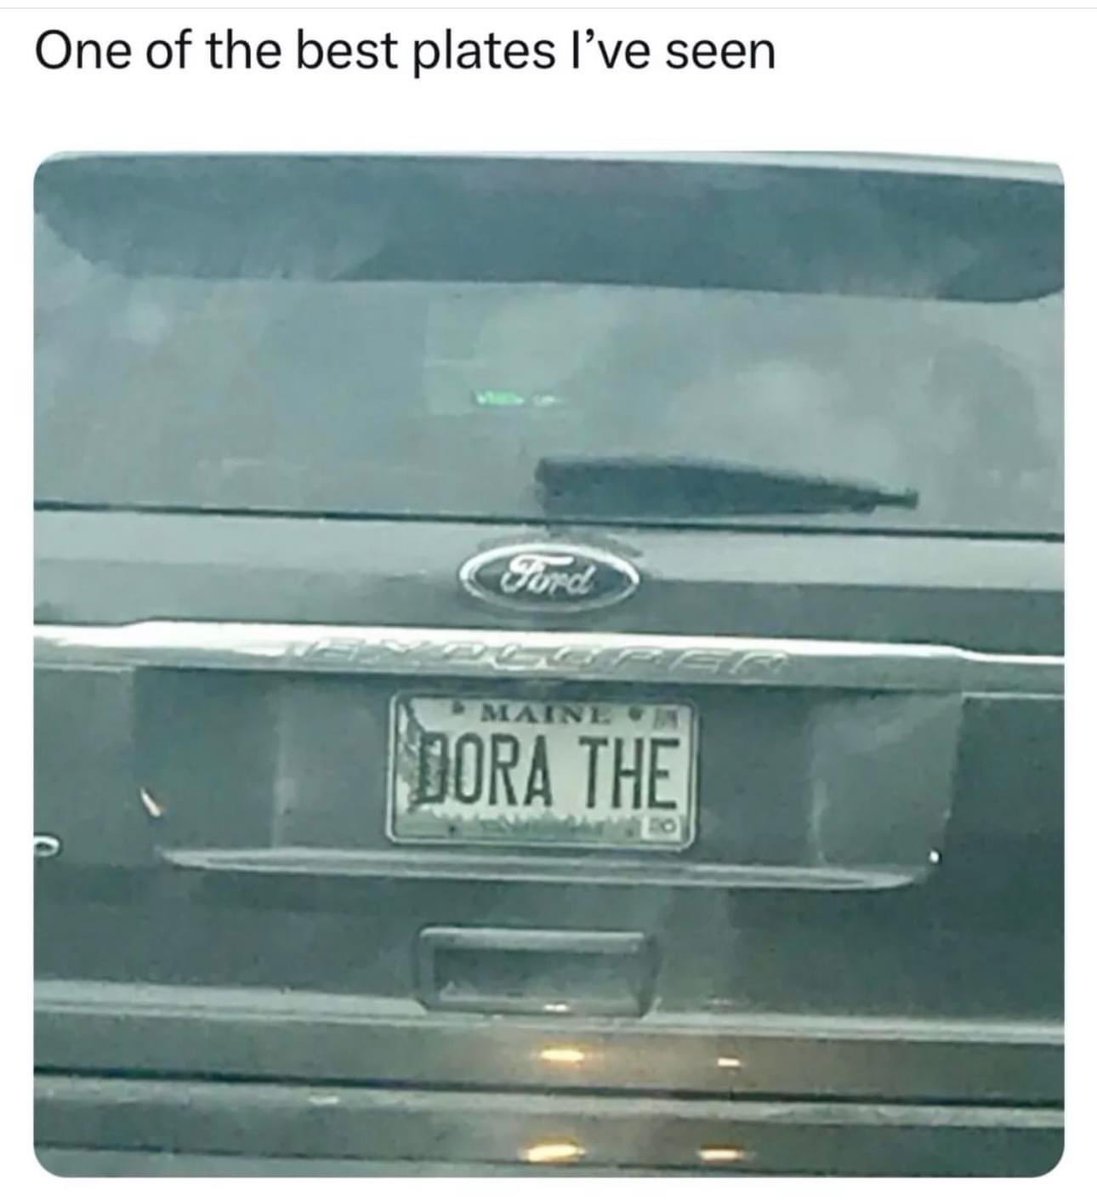 who the heck would have a Dora the explorer license plate?? 🤣🤣 #doratheexplorer #memeoftheday